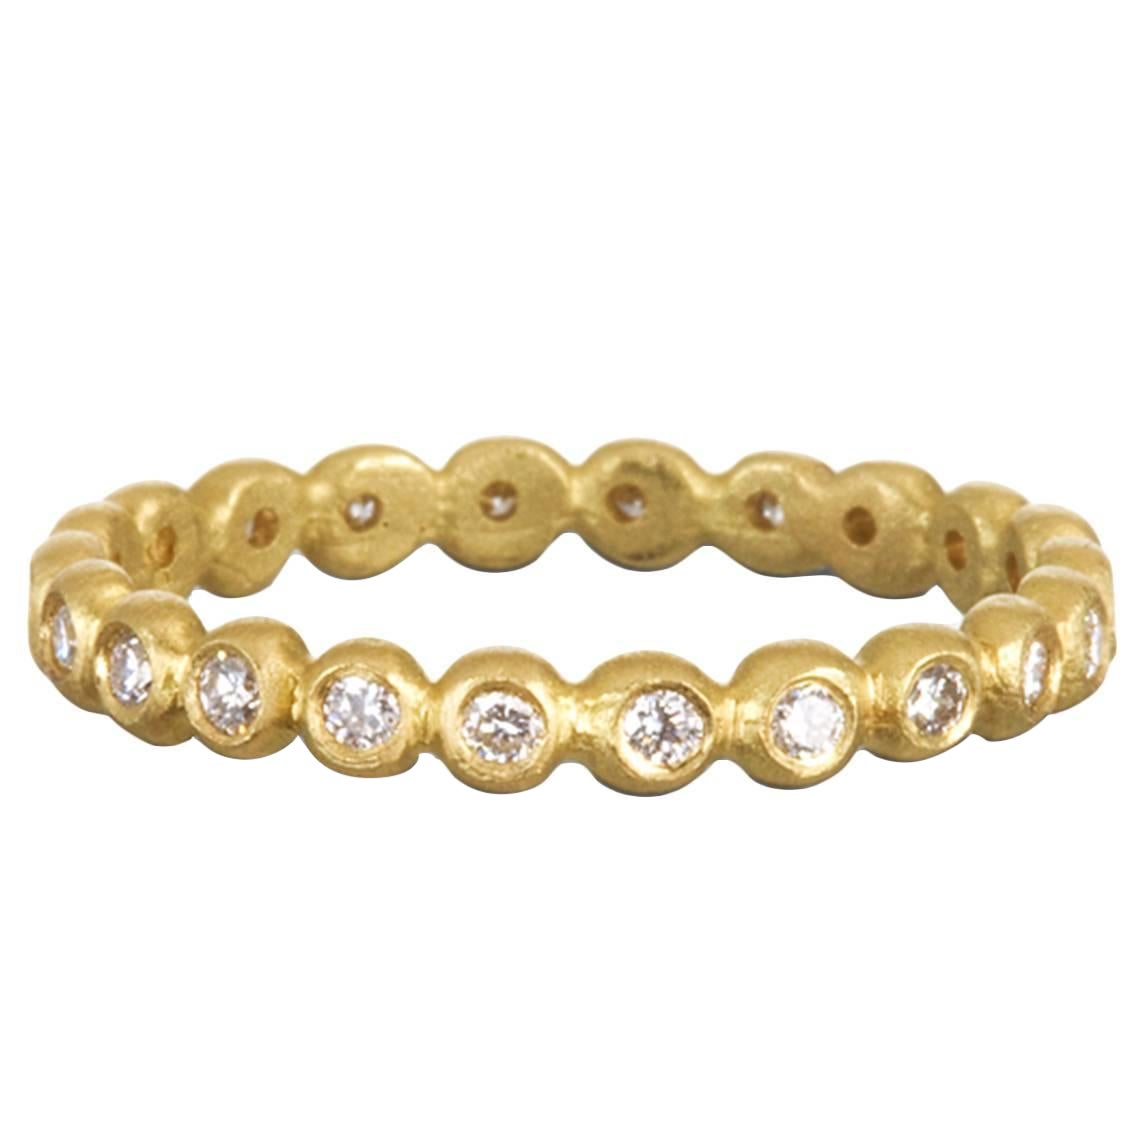 Faye Kim's signature Small Granulation Bead Ring in 18 karat gold offers endless possibilities for stacking or wear on its own for a delicate, clean, contemporary look.  

Width: 3 MM (1/8